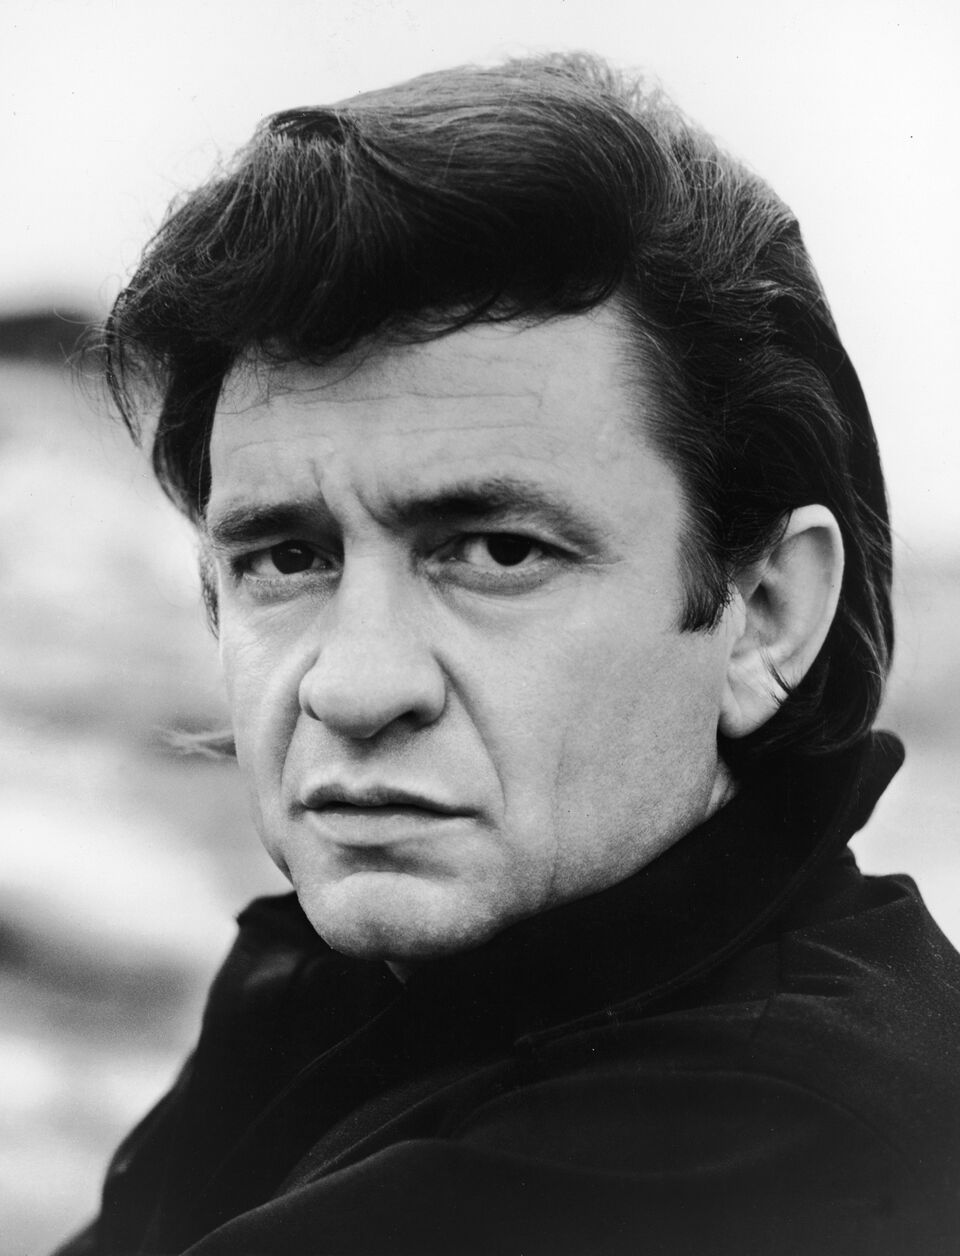 Headshot portrait of Johnny Cash for his television show. | Source: Getty Images